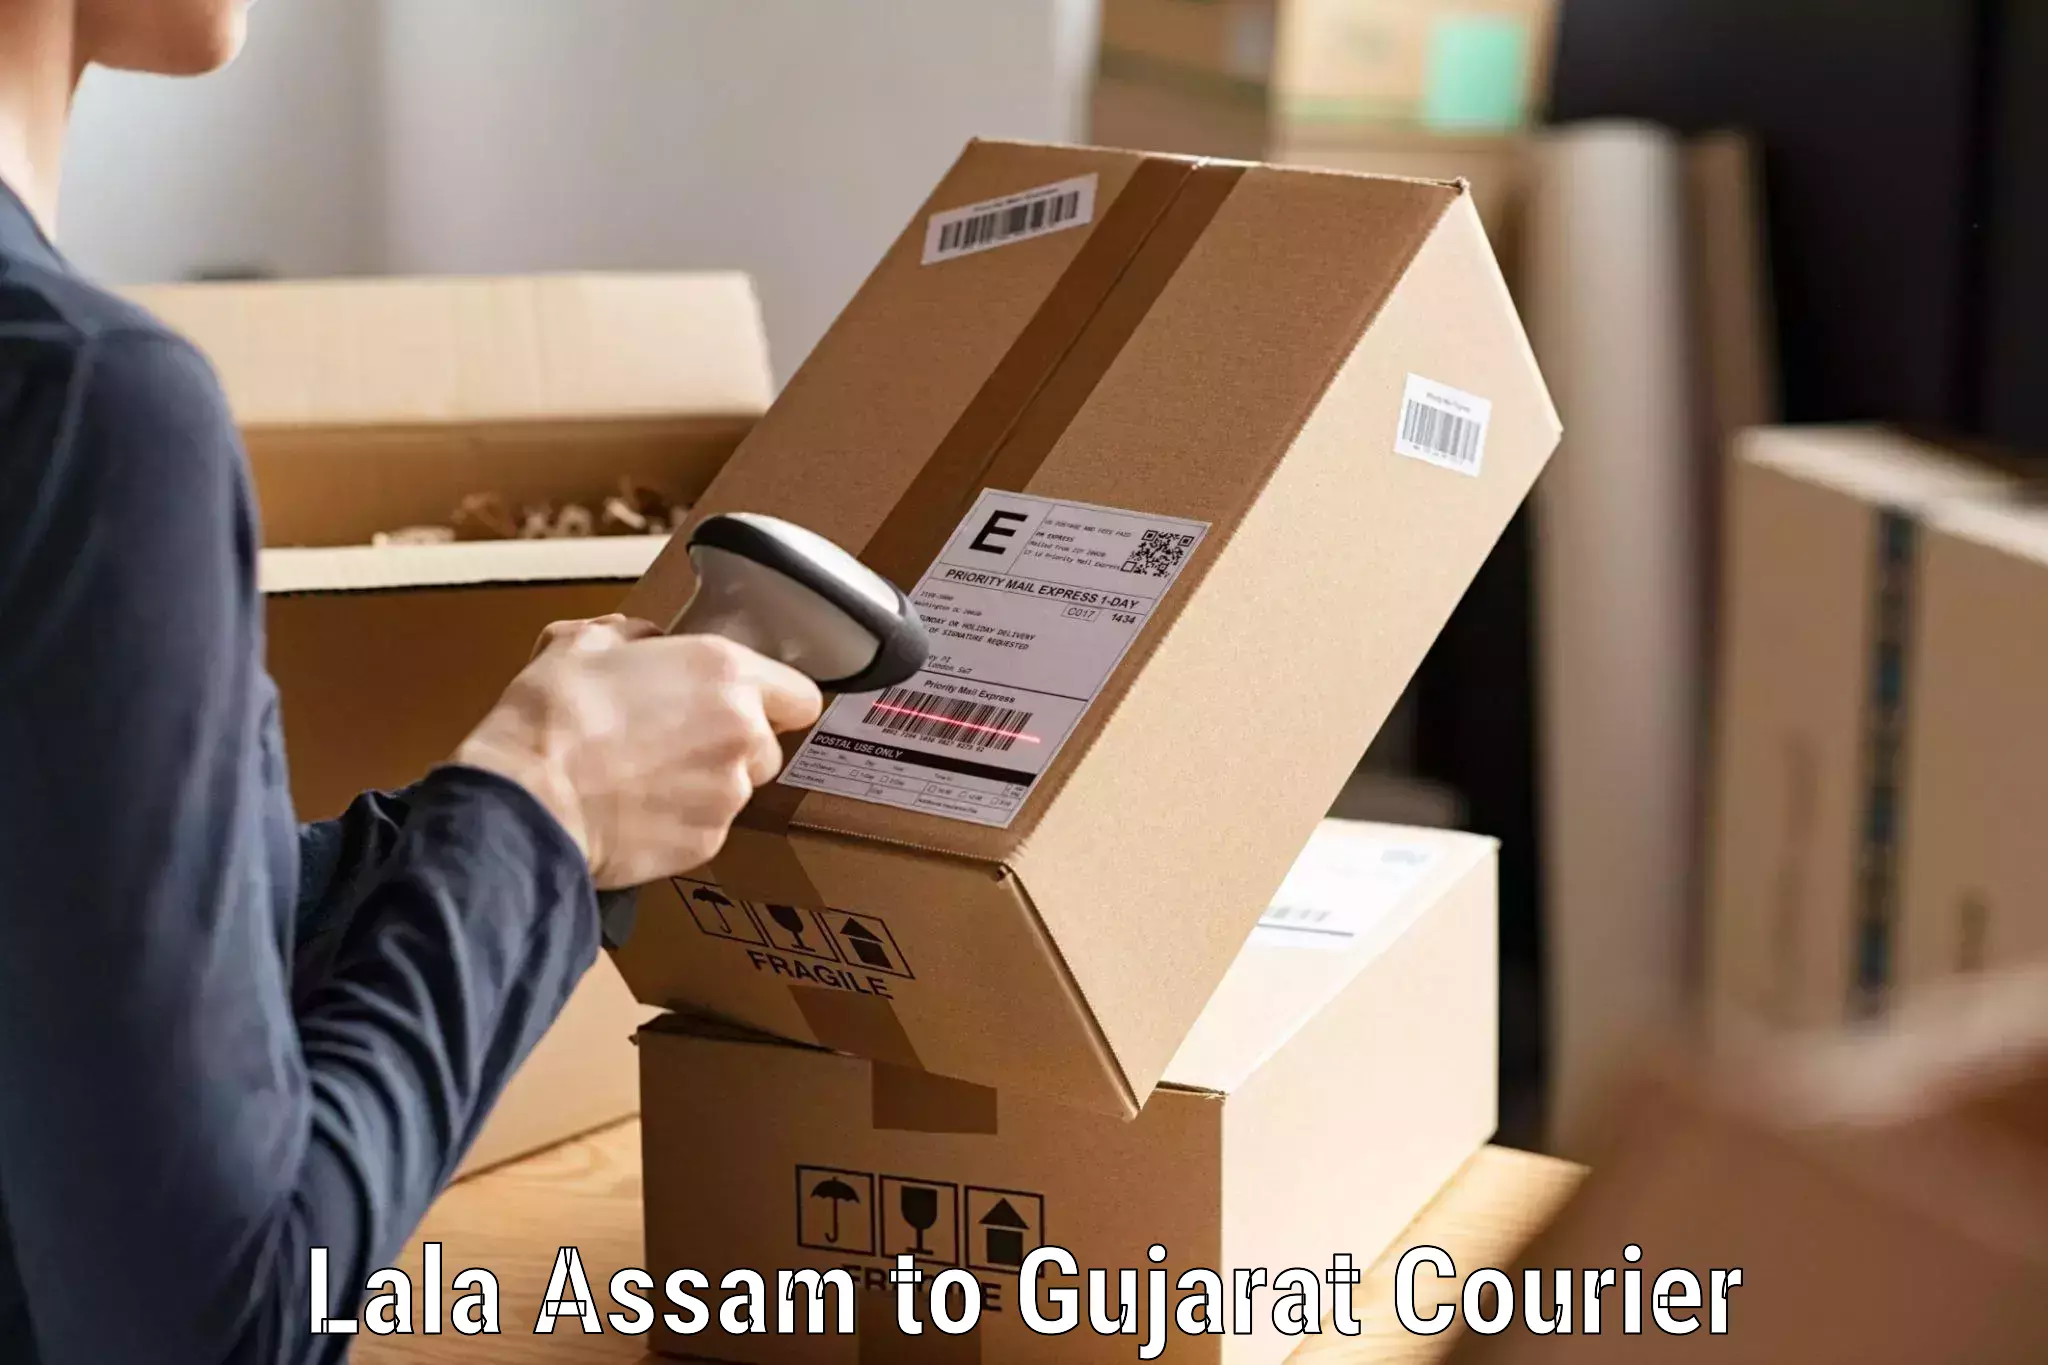 State-of-the-art courier technology Lala Assam to Tapi